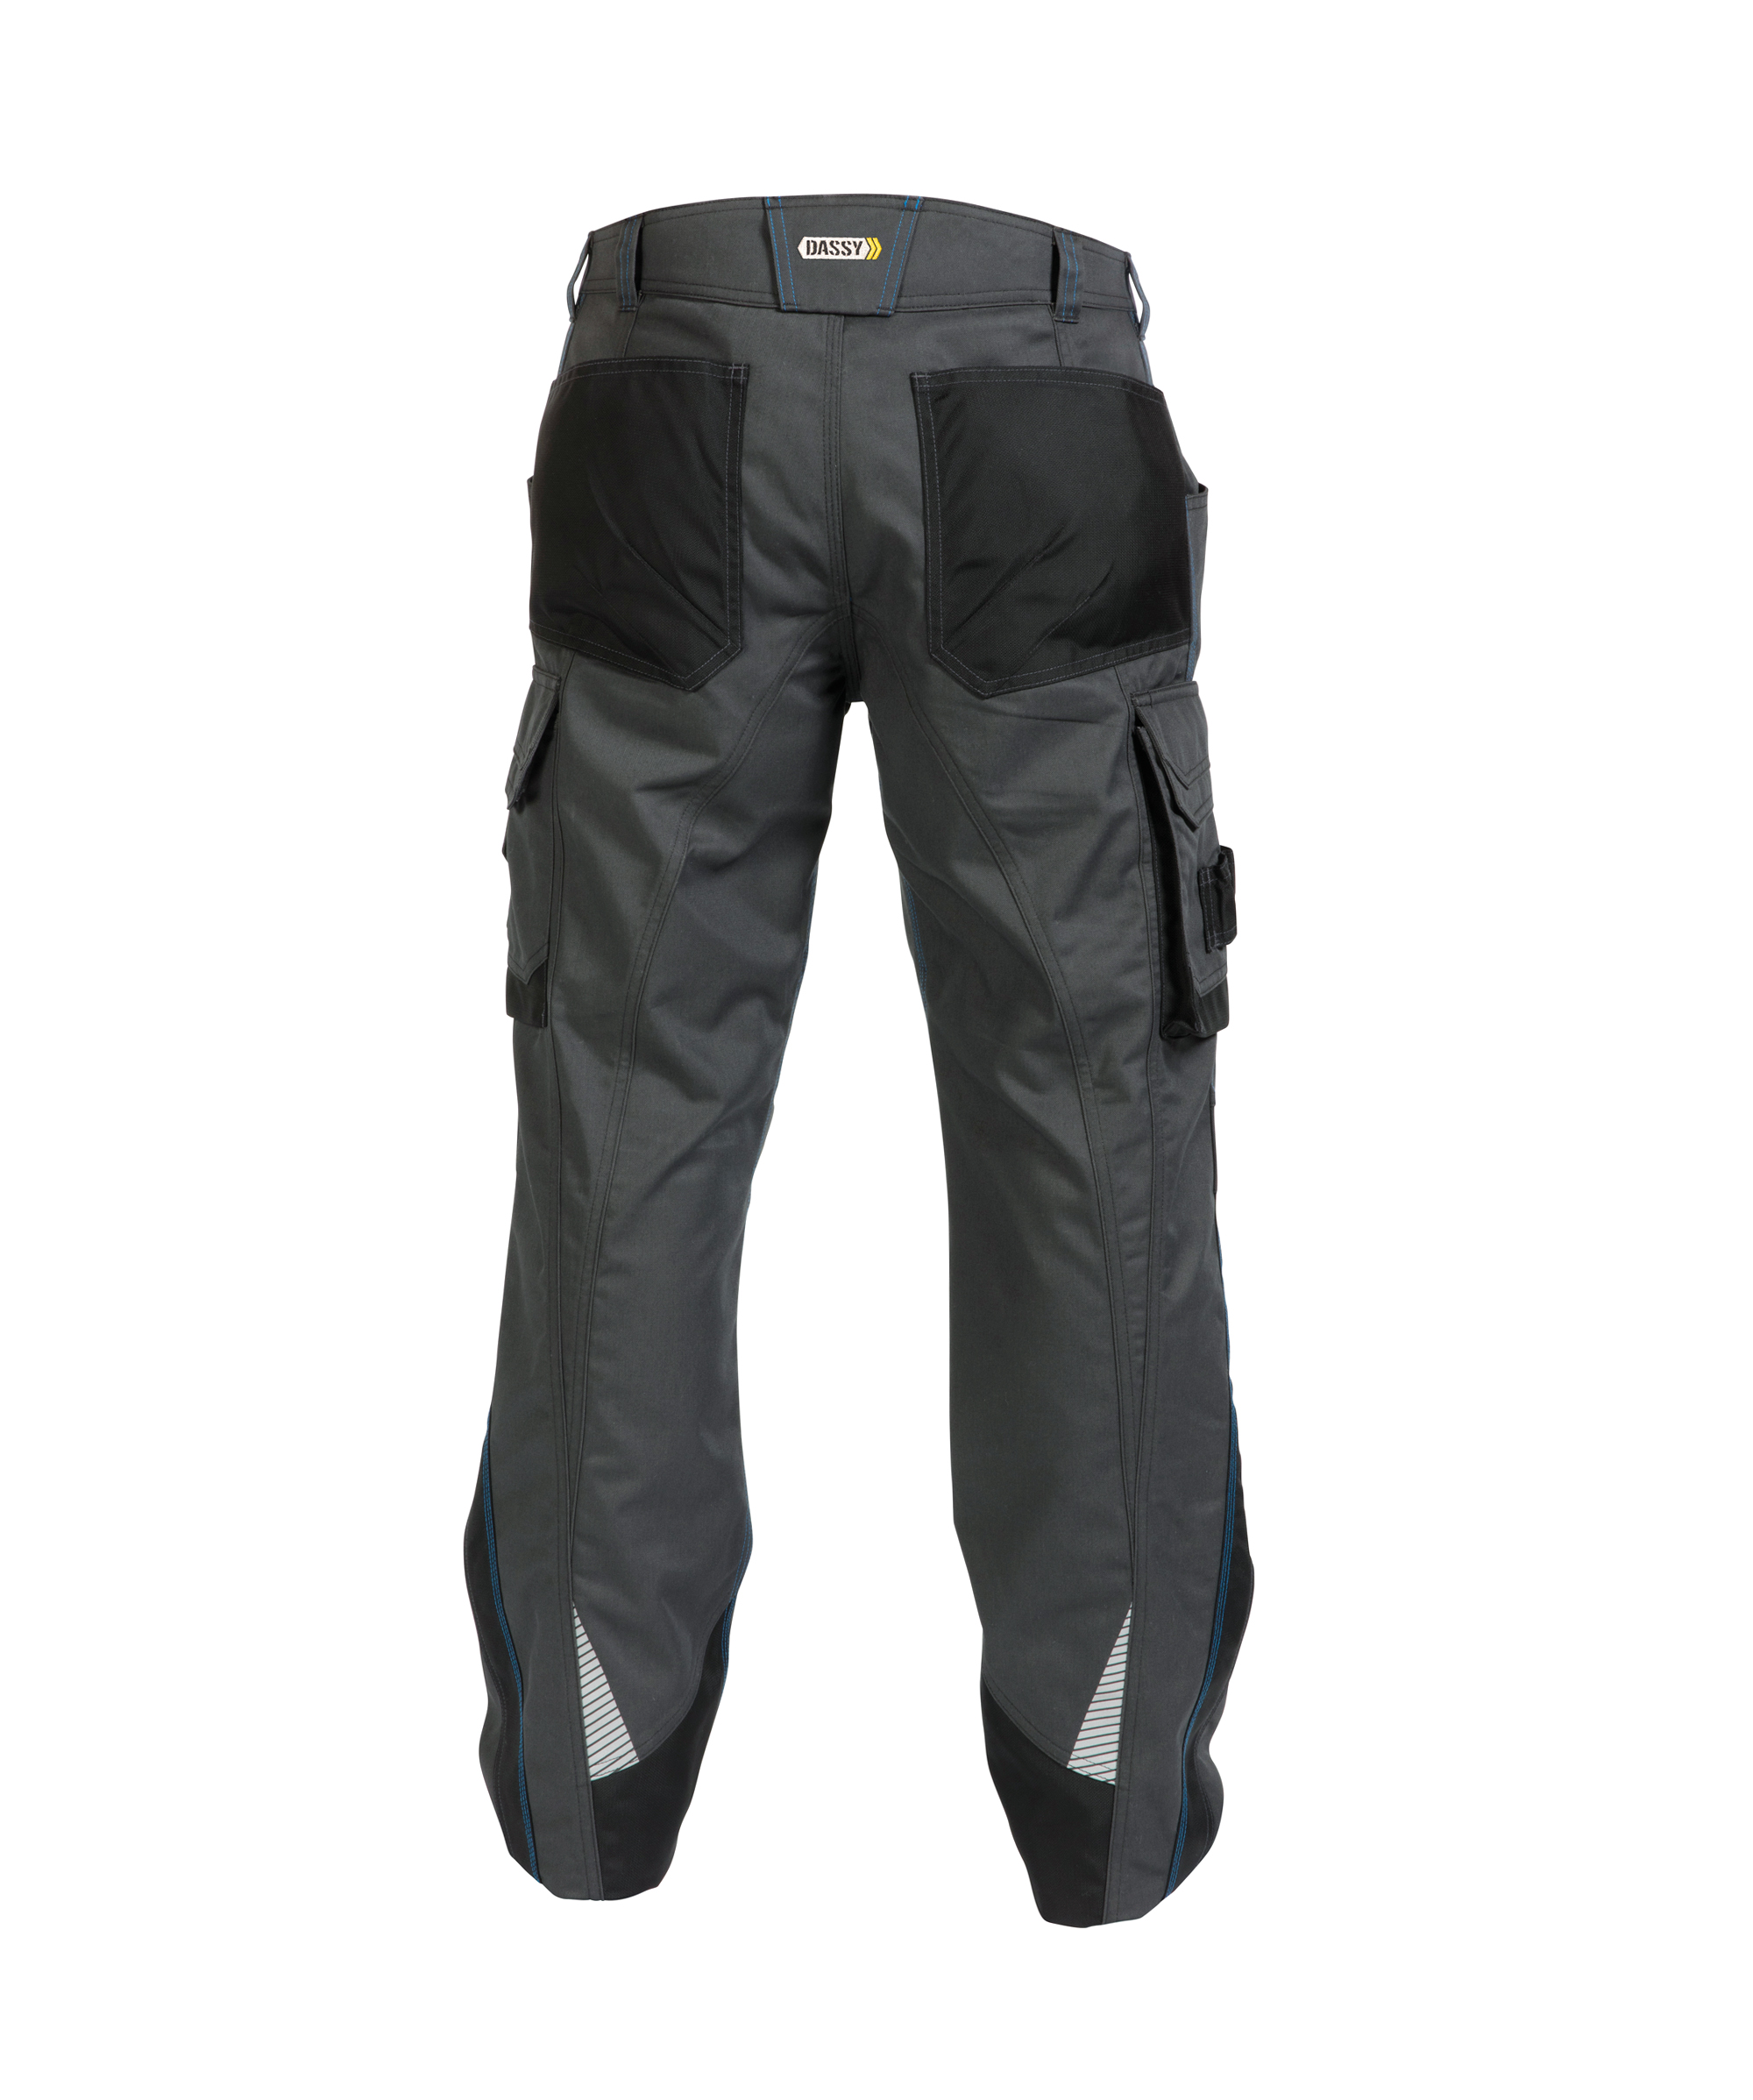 nova_two-tone-work-trousers-with-knee-pockets_anthracite-grey-black_back.jpg